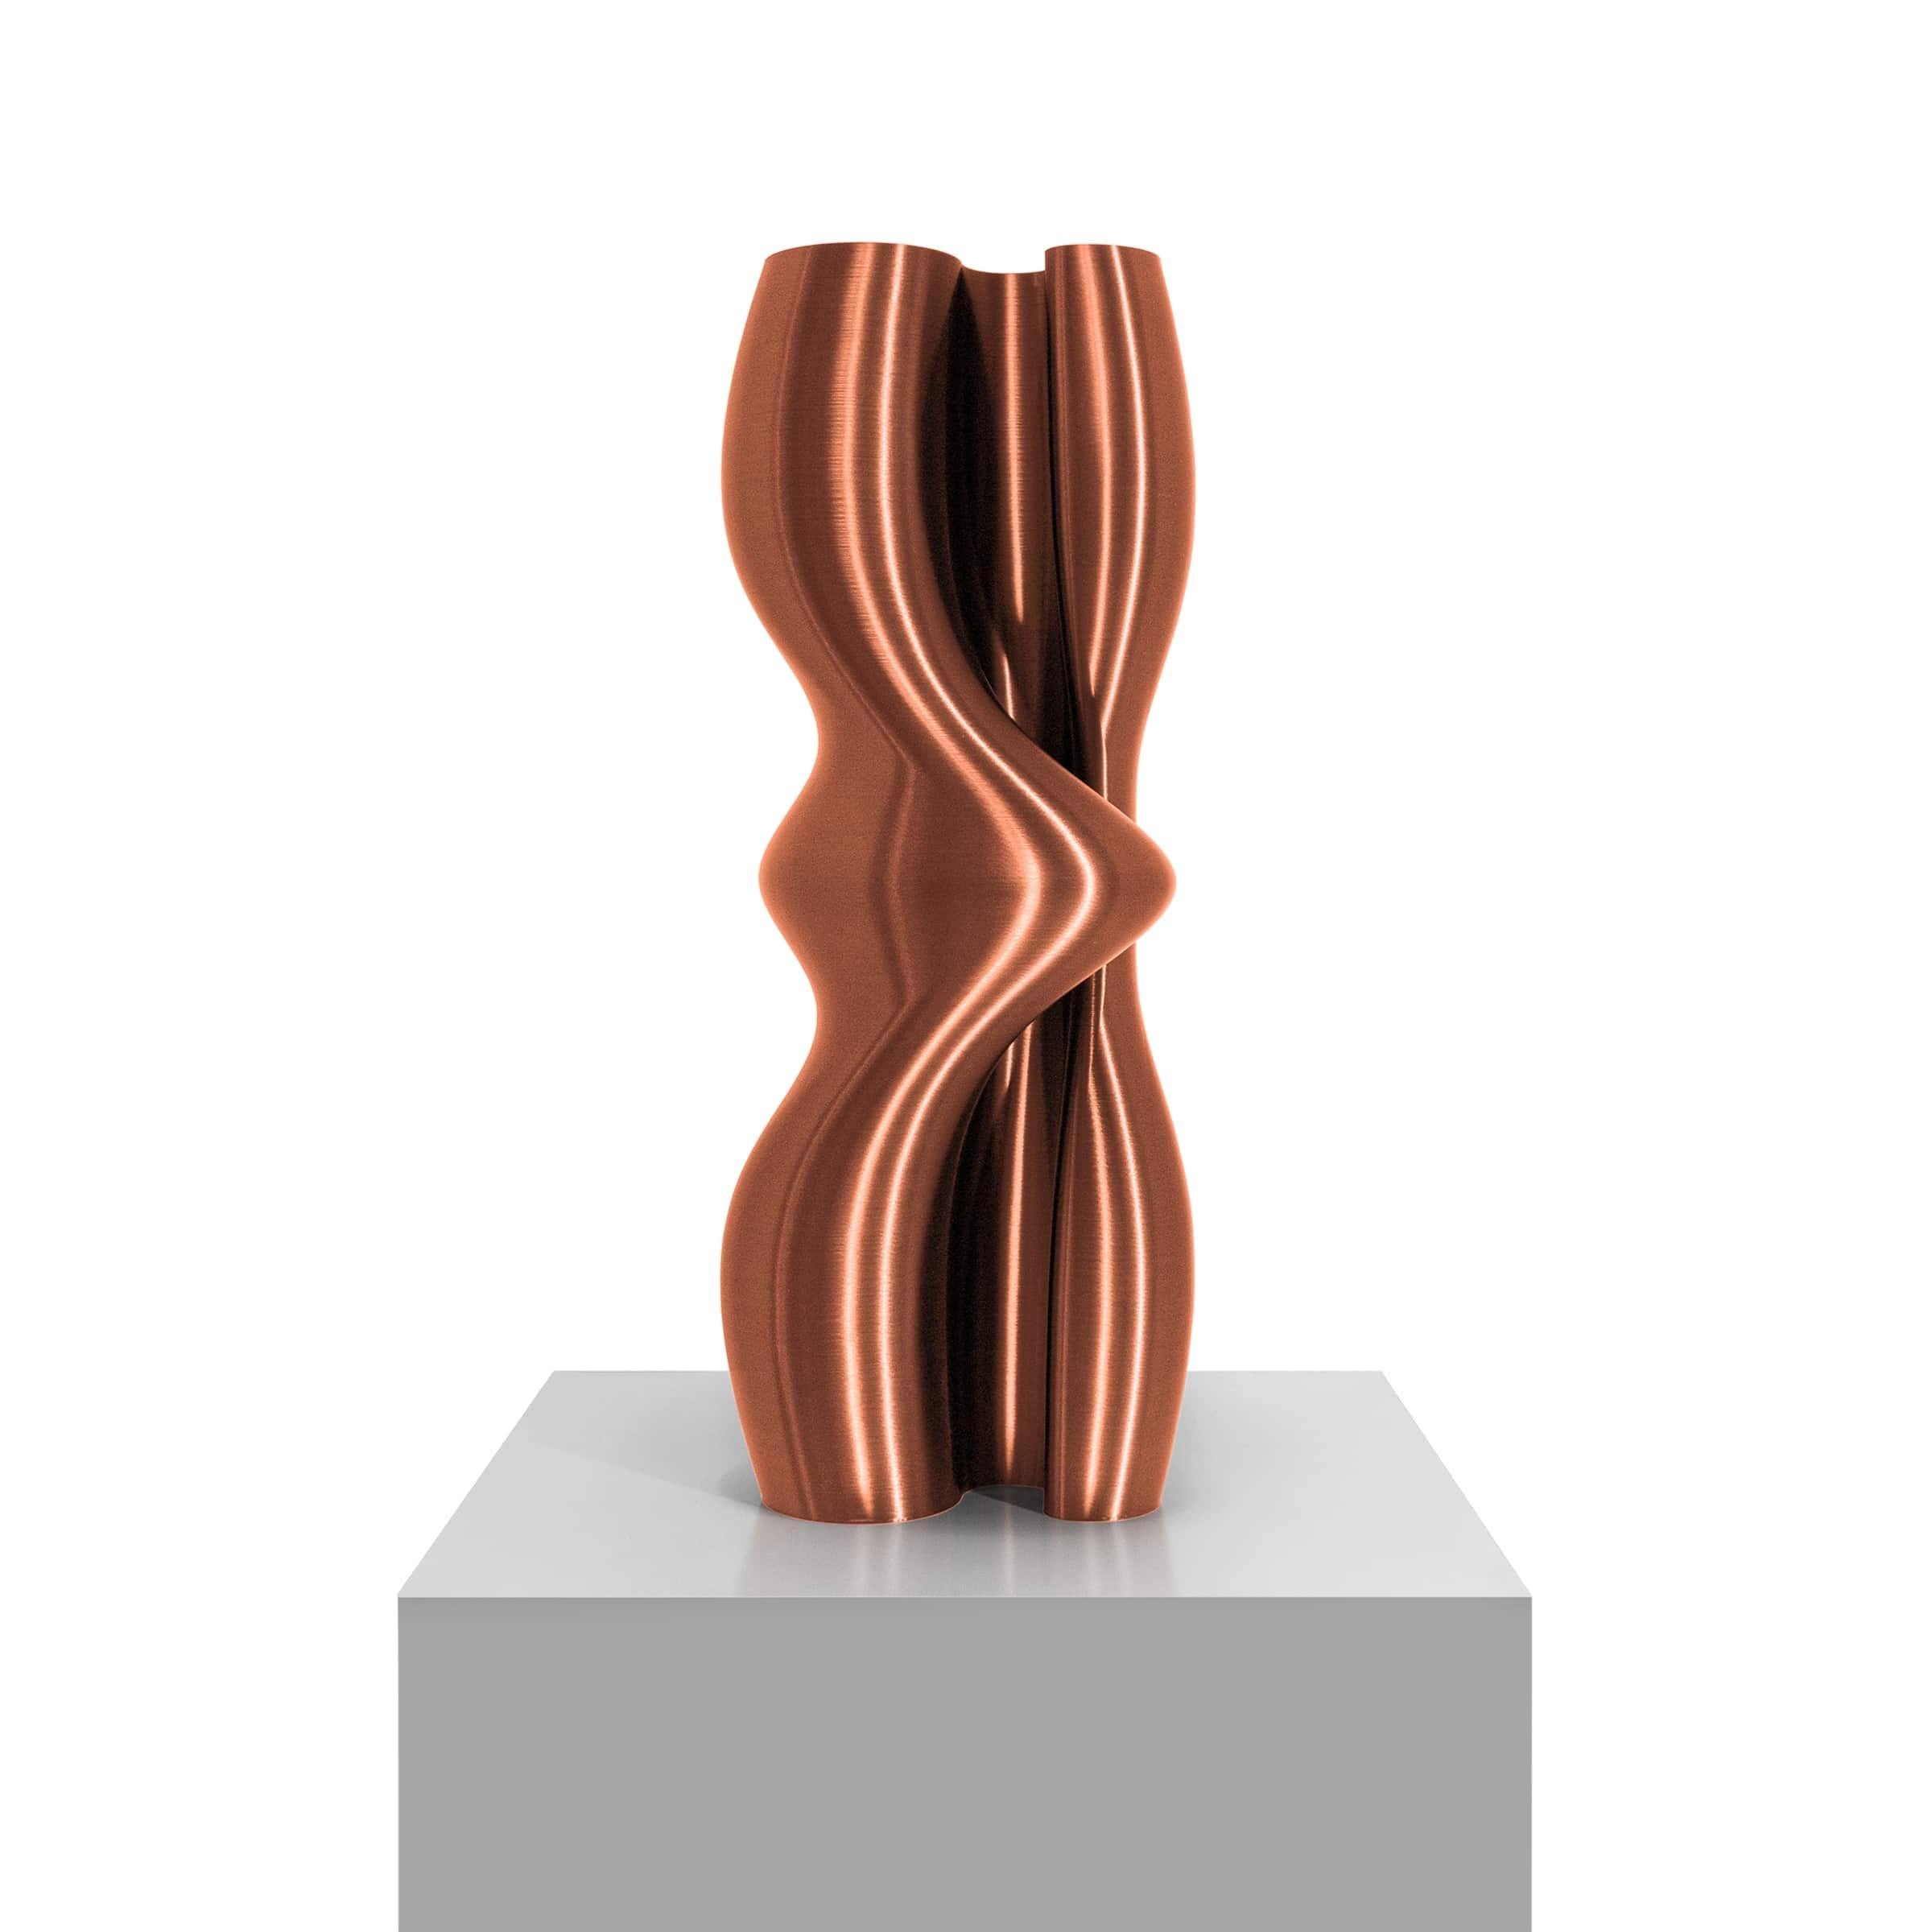 Vase-sculpture by DygoDesign
Defined by a luminous and vivacious metallic shade, this stunning sculpture is part of the Dygo Selection Collection. Boasting an organic, contemporary character, it features sinuous, enveloping shapes inspired by the